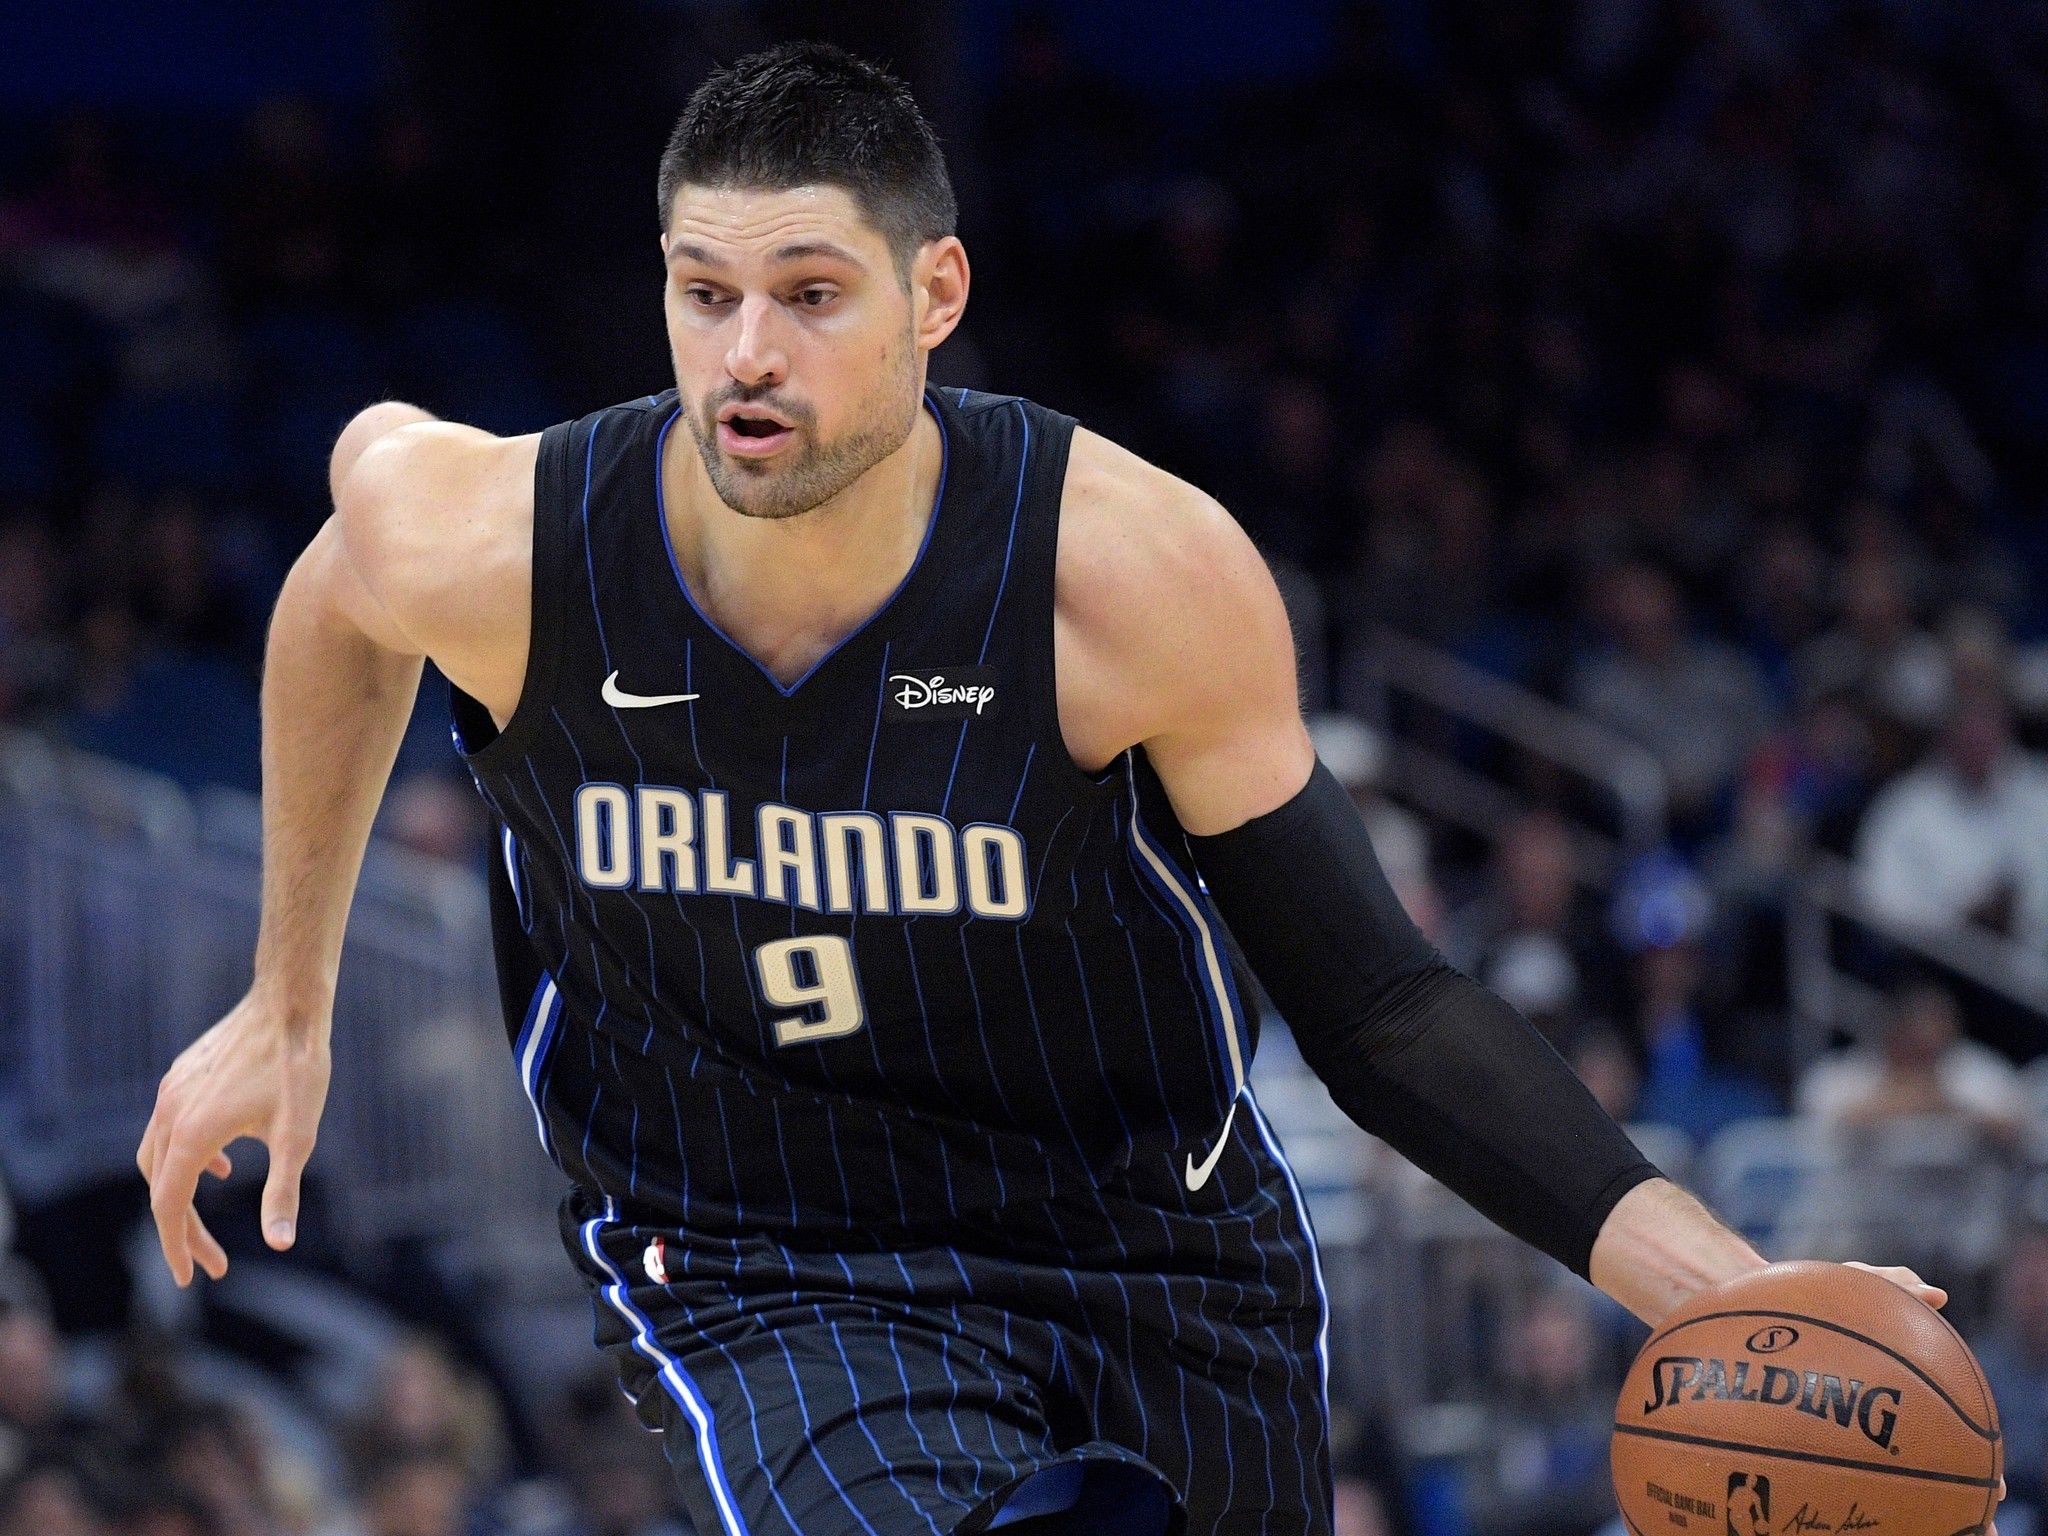 Magic center Nikola Vucevic will sit tonight against Lakers but appears close to returning